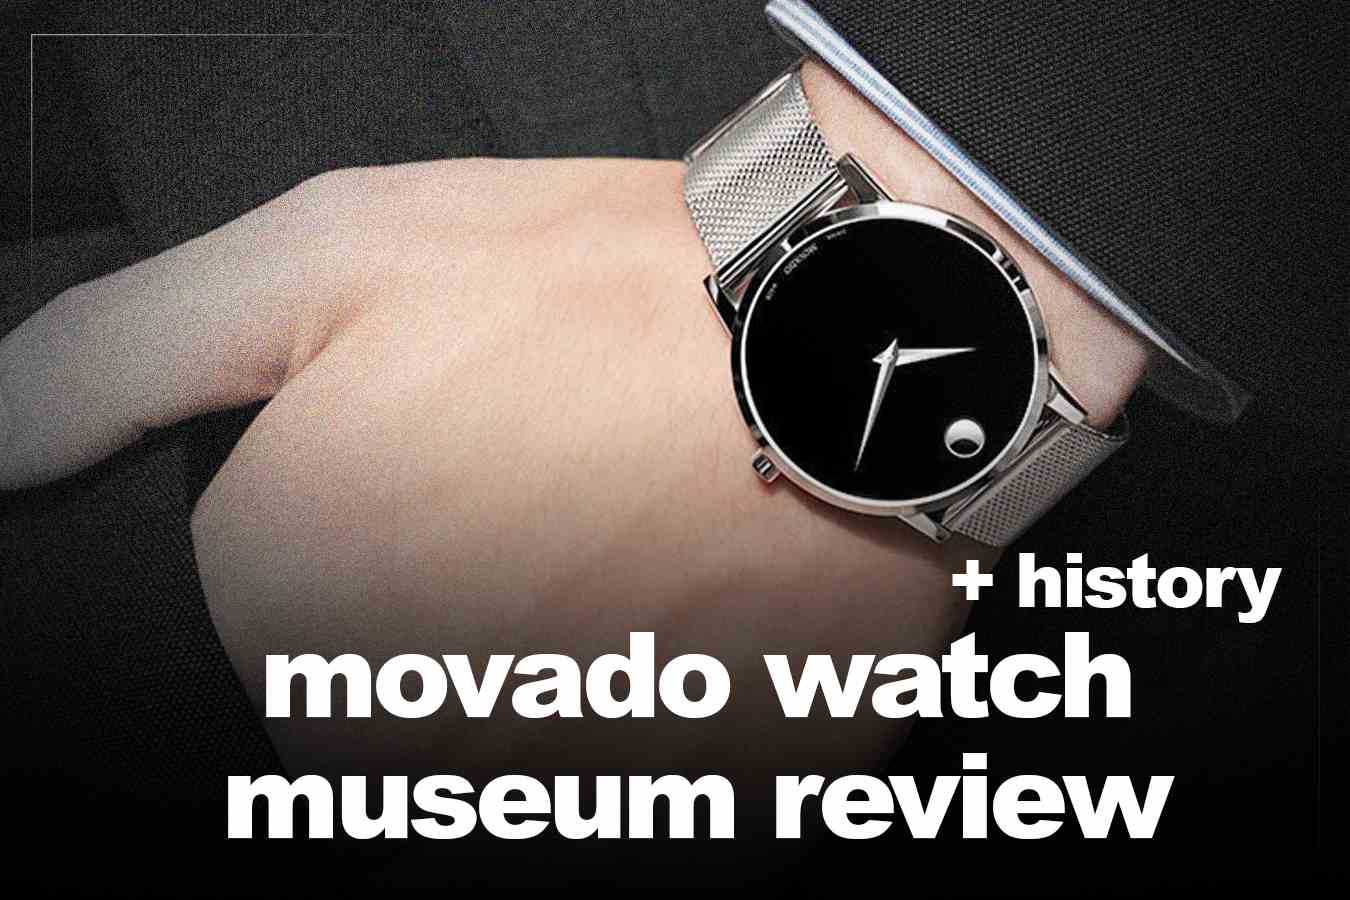 Movado Watch Museum review + history